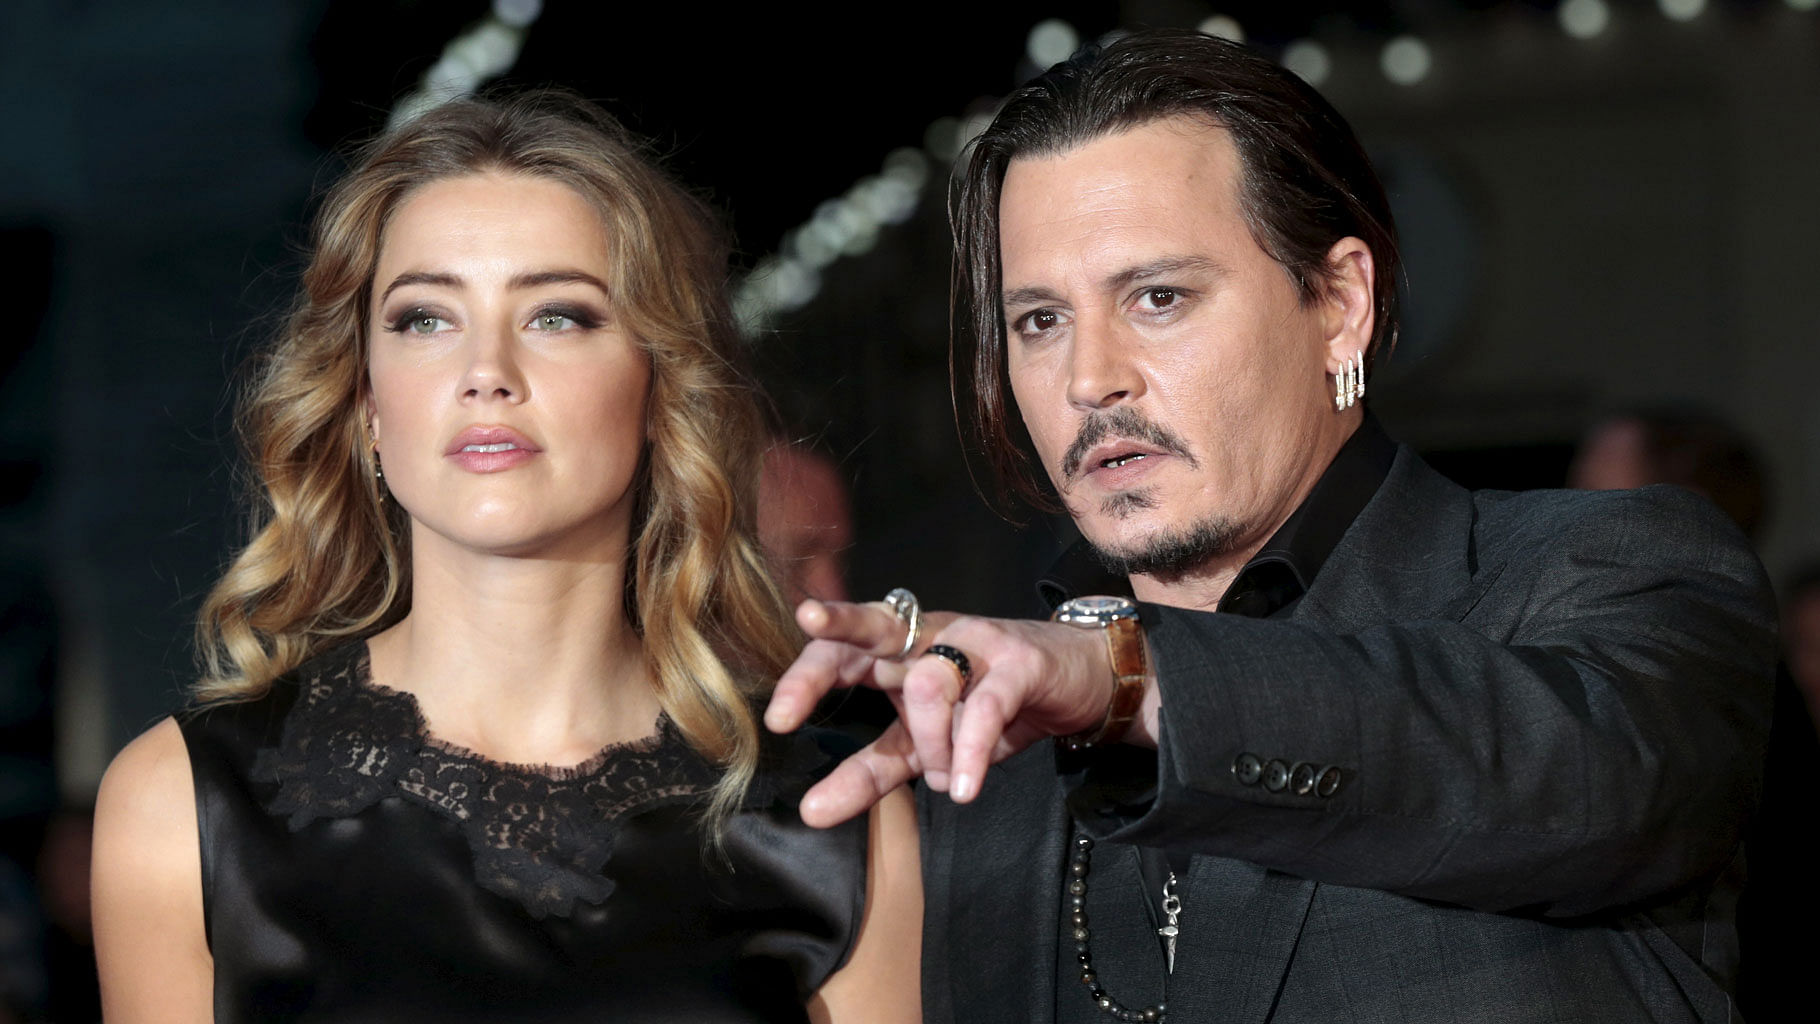 Johnny Depp and Amber Heard are currently entangled in a messy divorce (Photo: Reuters)